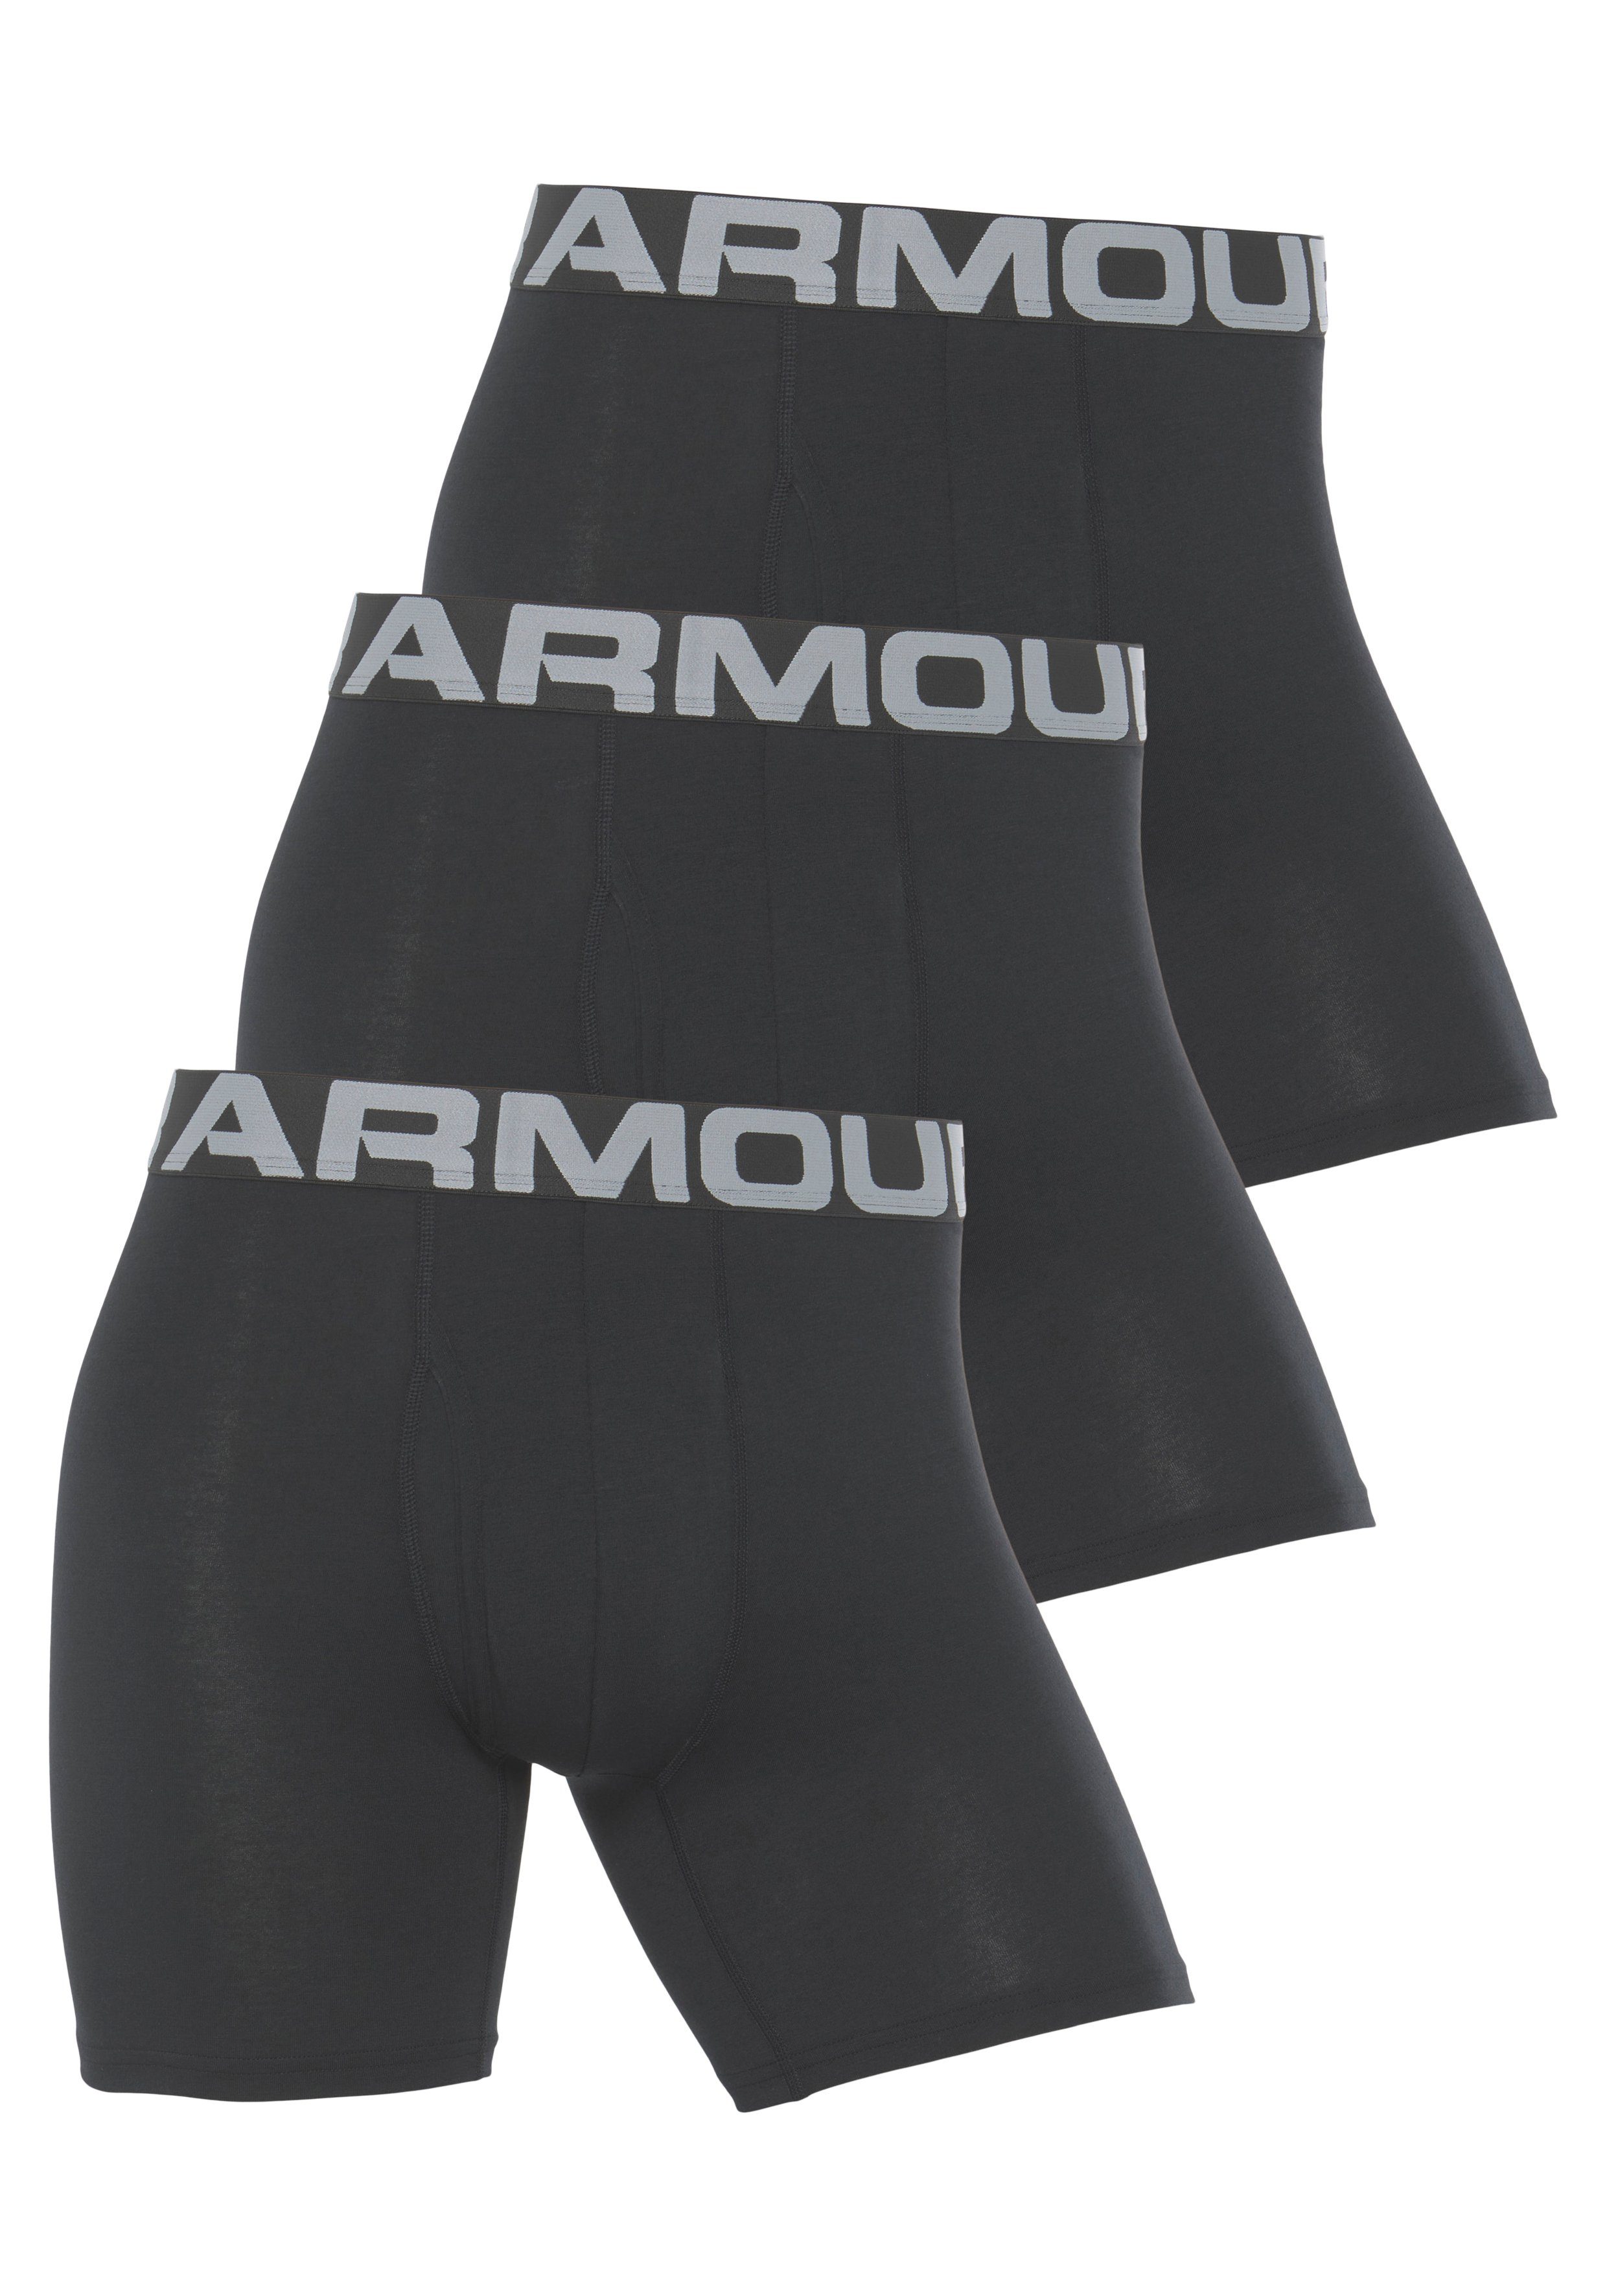 PACK Under Armour® 3-St., 3er- ARMOUR Boxershorts UNDER Pack), von 6 Boxershorts 1 CHARGED (Packung, in COTTON